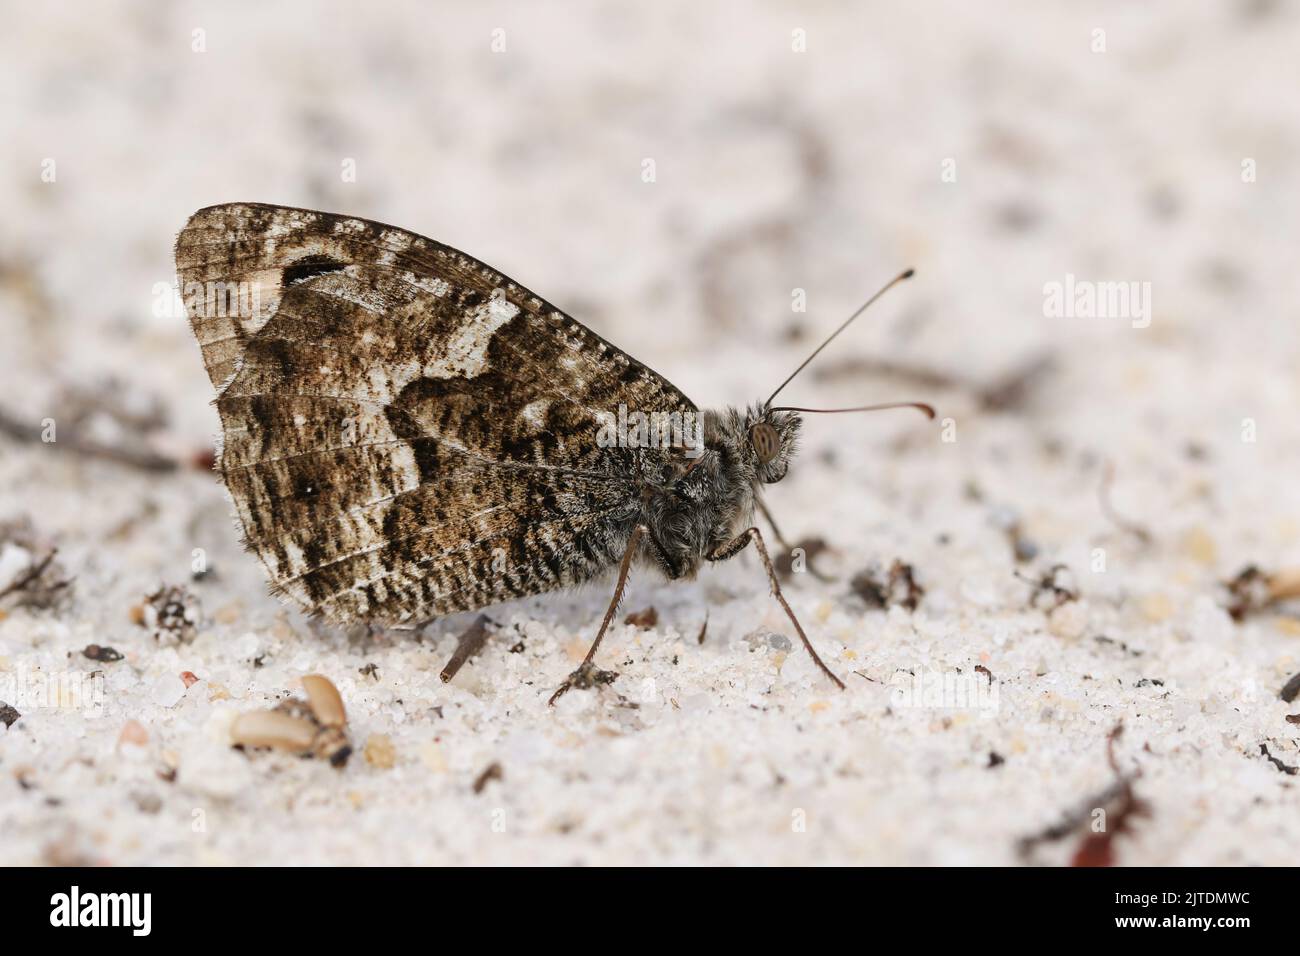 A Grayling Butterfly, Hipparchia semele, resting on the ground in heathland. Stock Photo